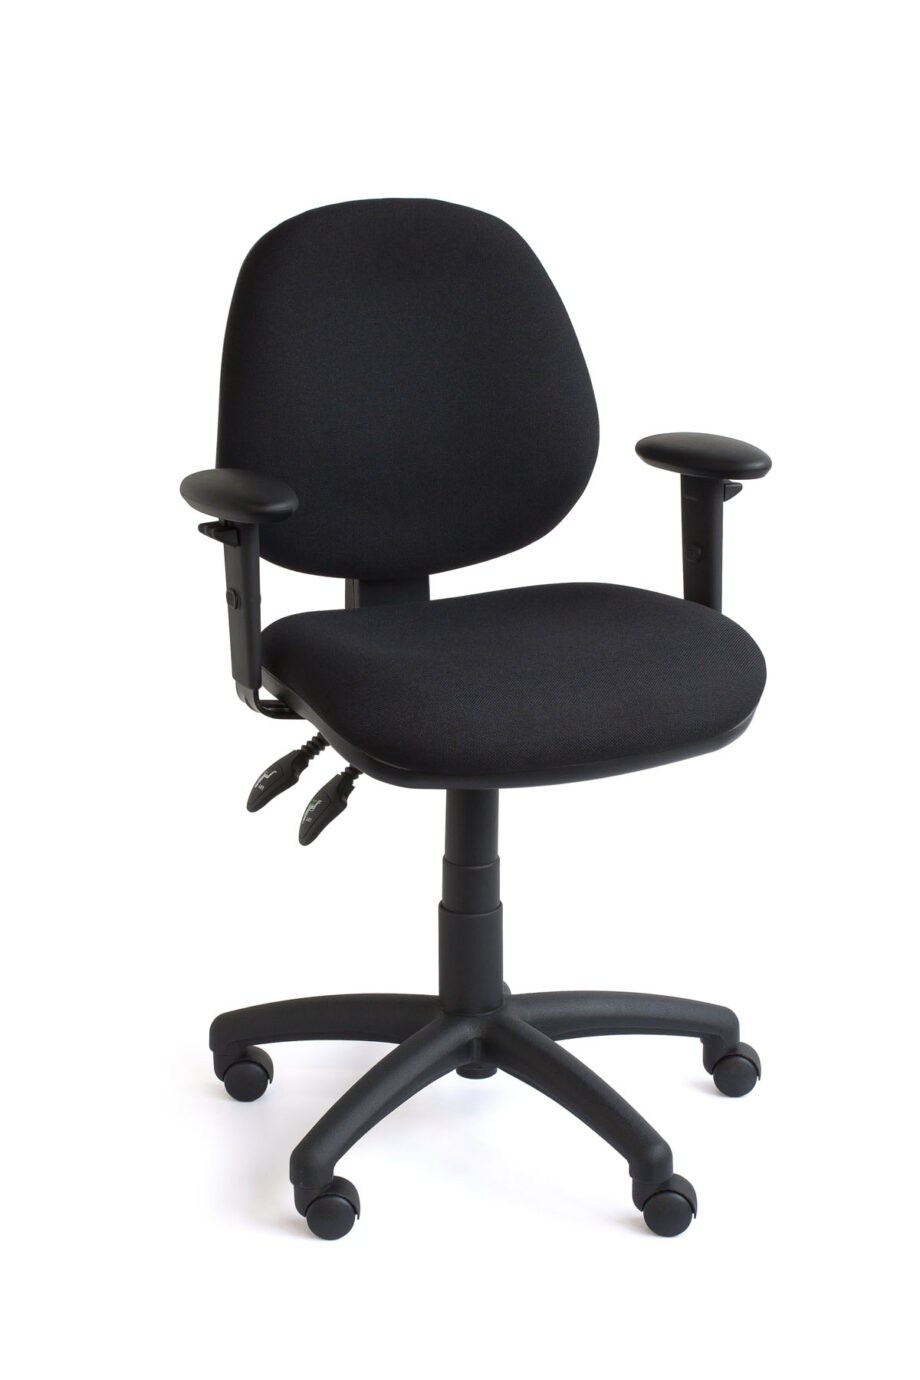 Affordable Gregory chair